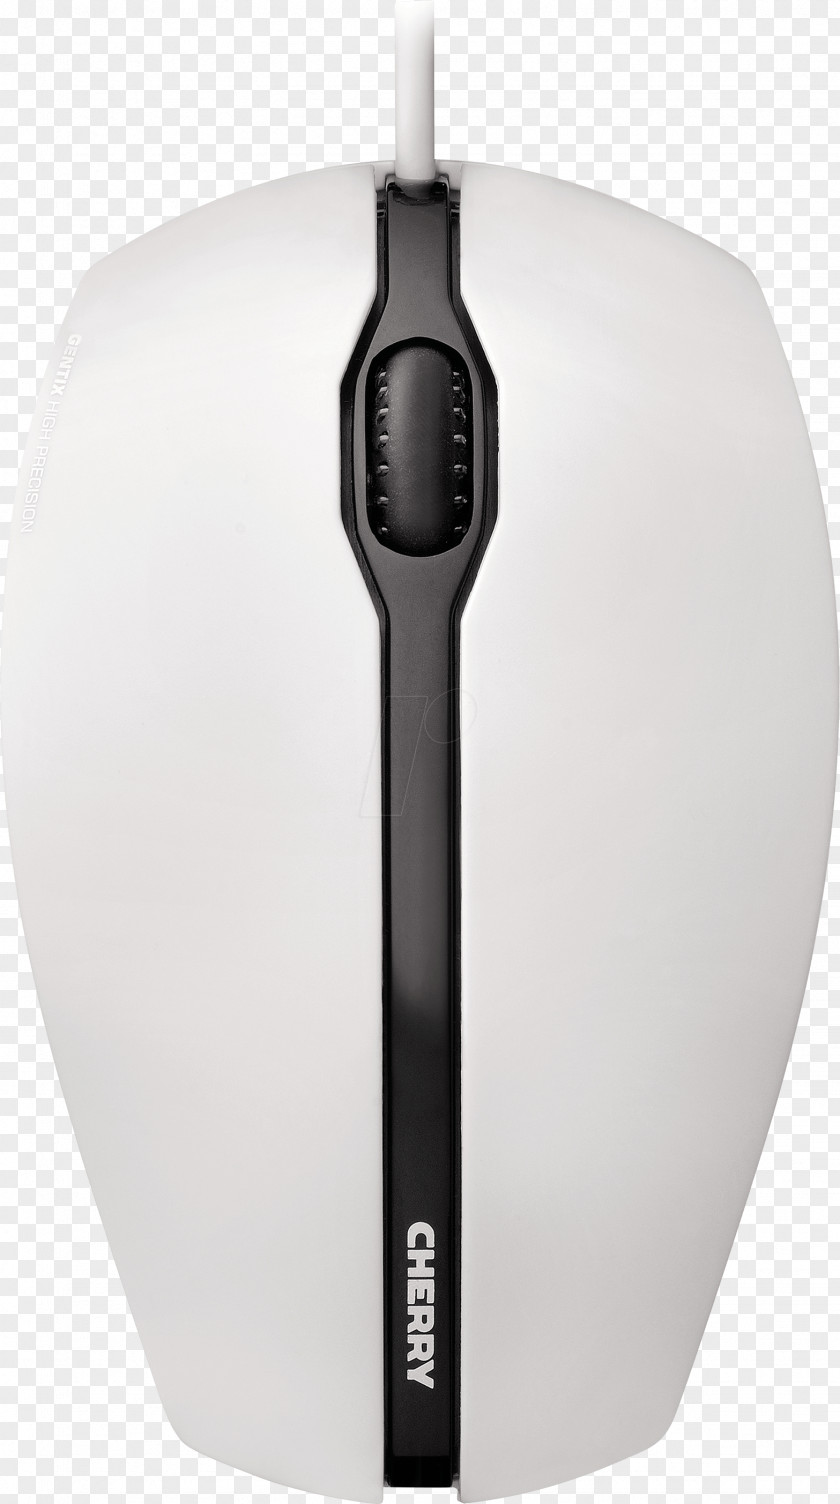 Computer Mouse Optical Trackball Kensington Products Group Input Devices PNG